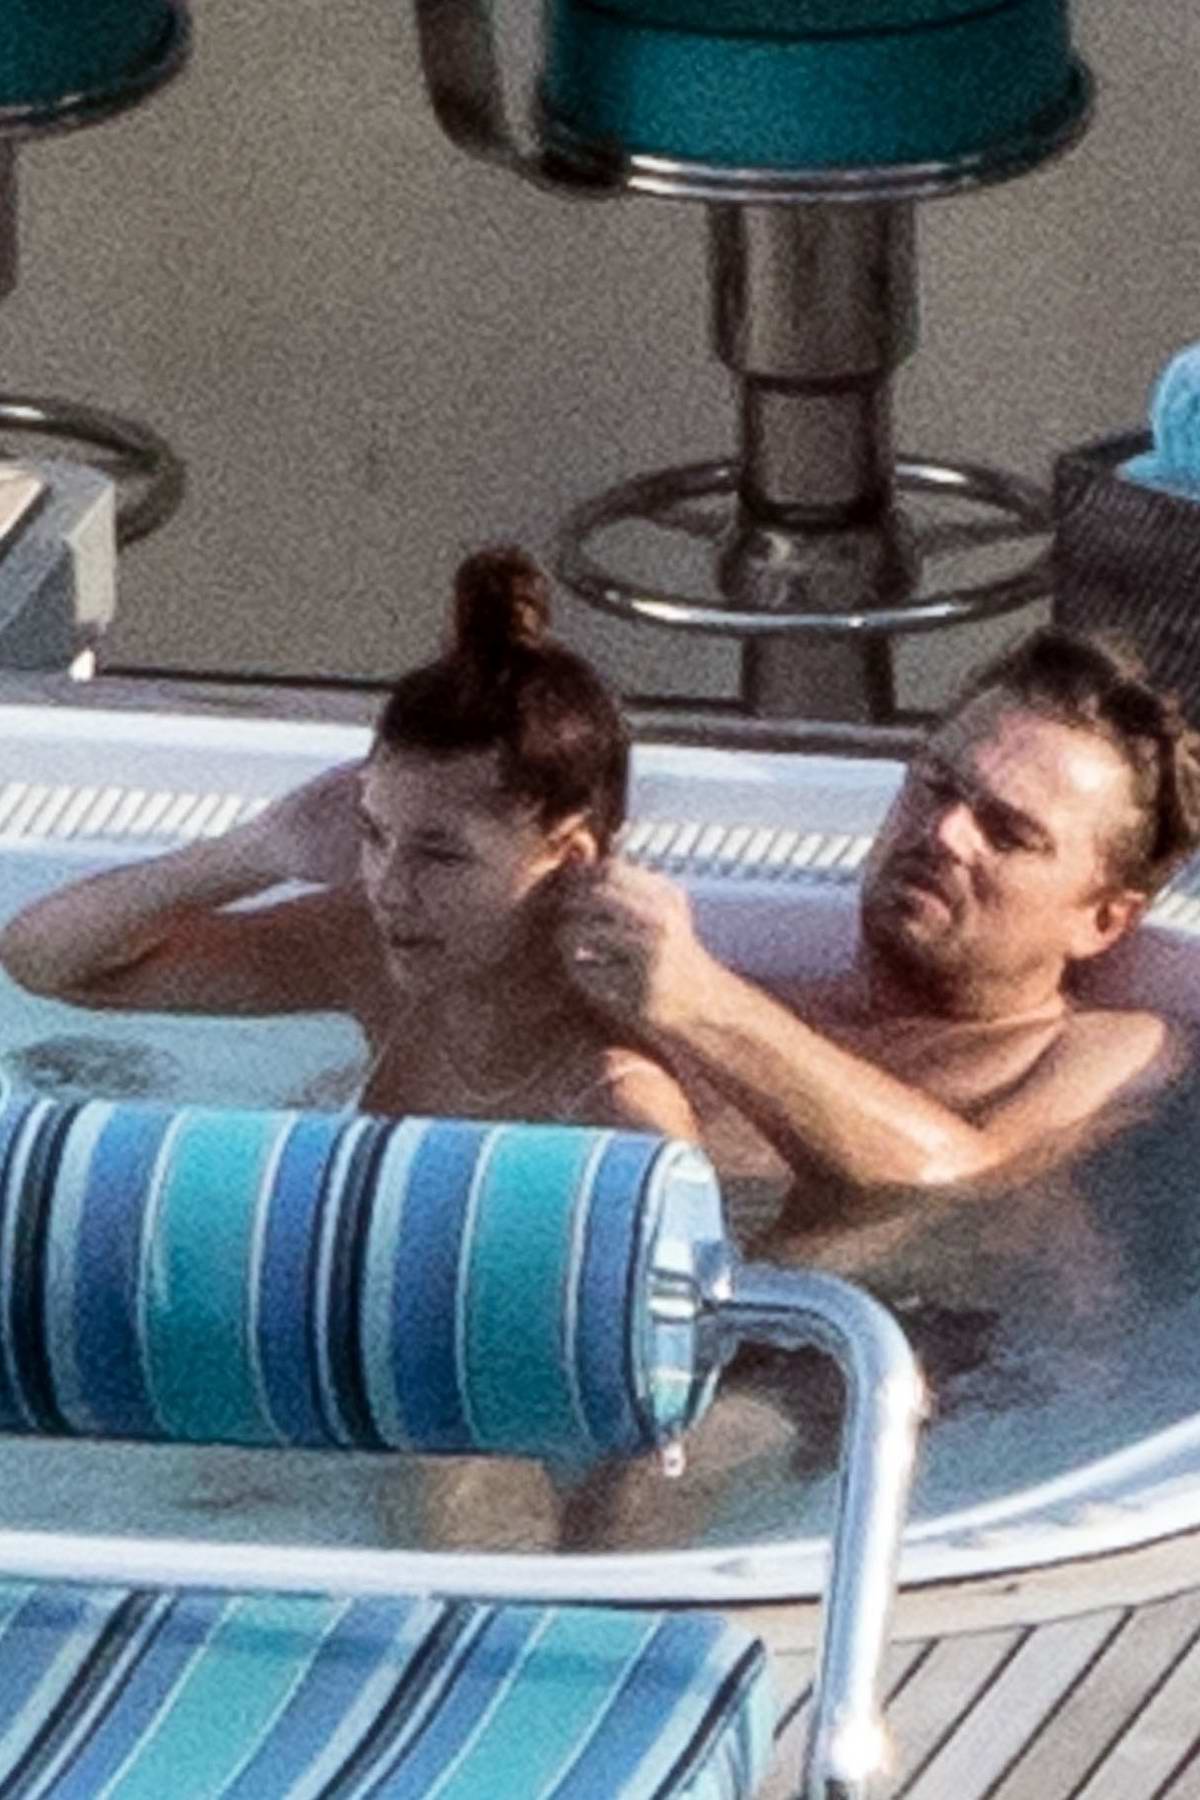 Camila Morrone and Leonardo DiCaprio have a good time in a hot tub while on vacation ...